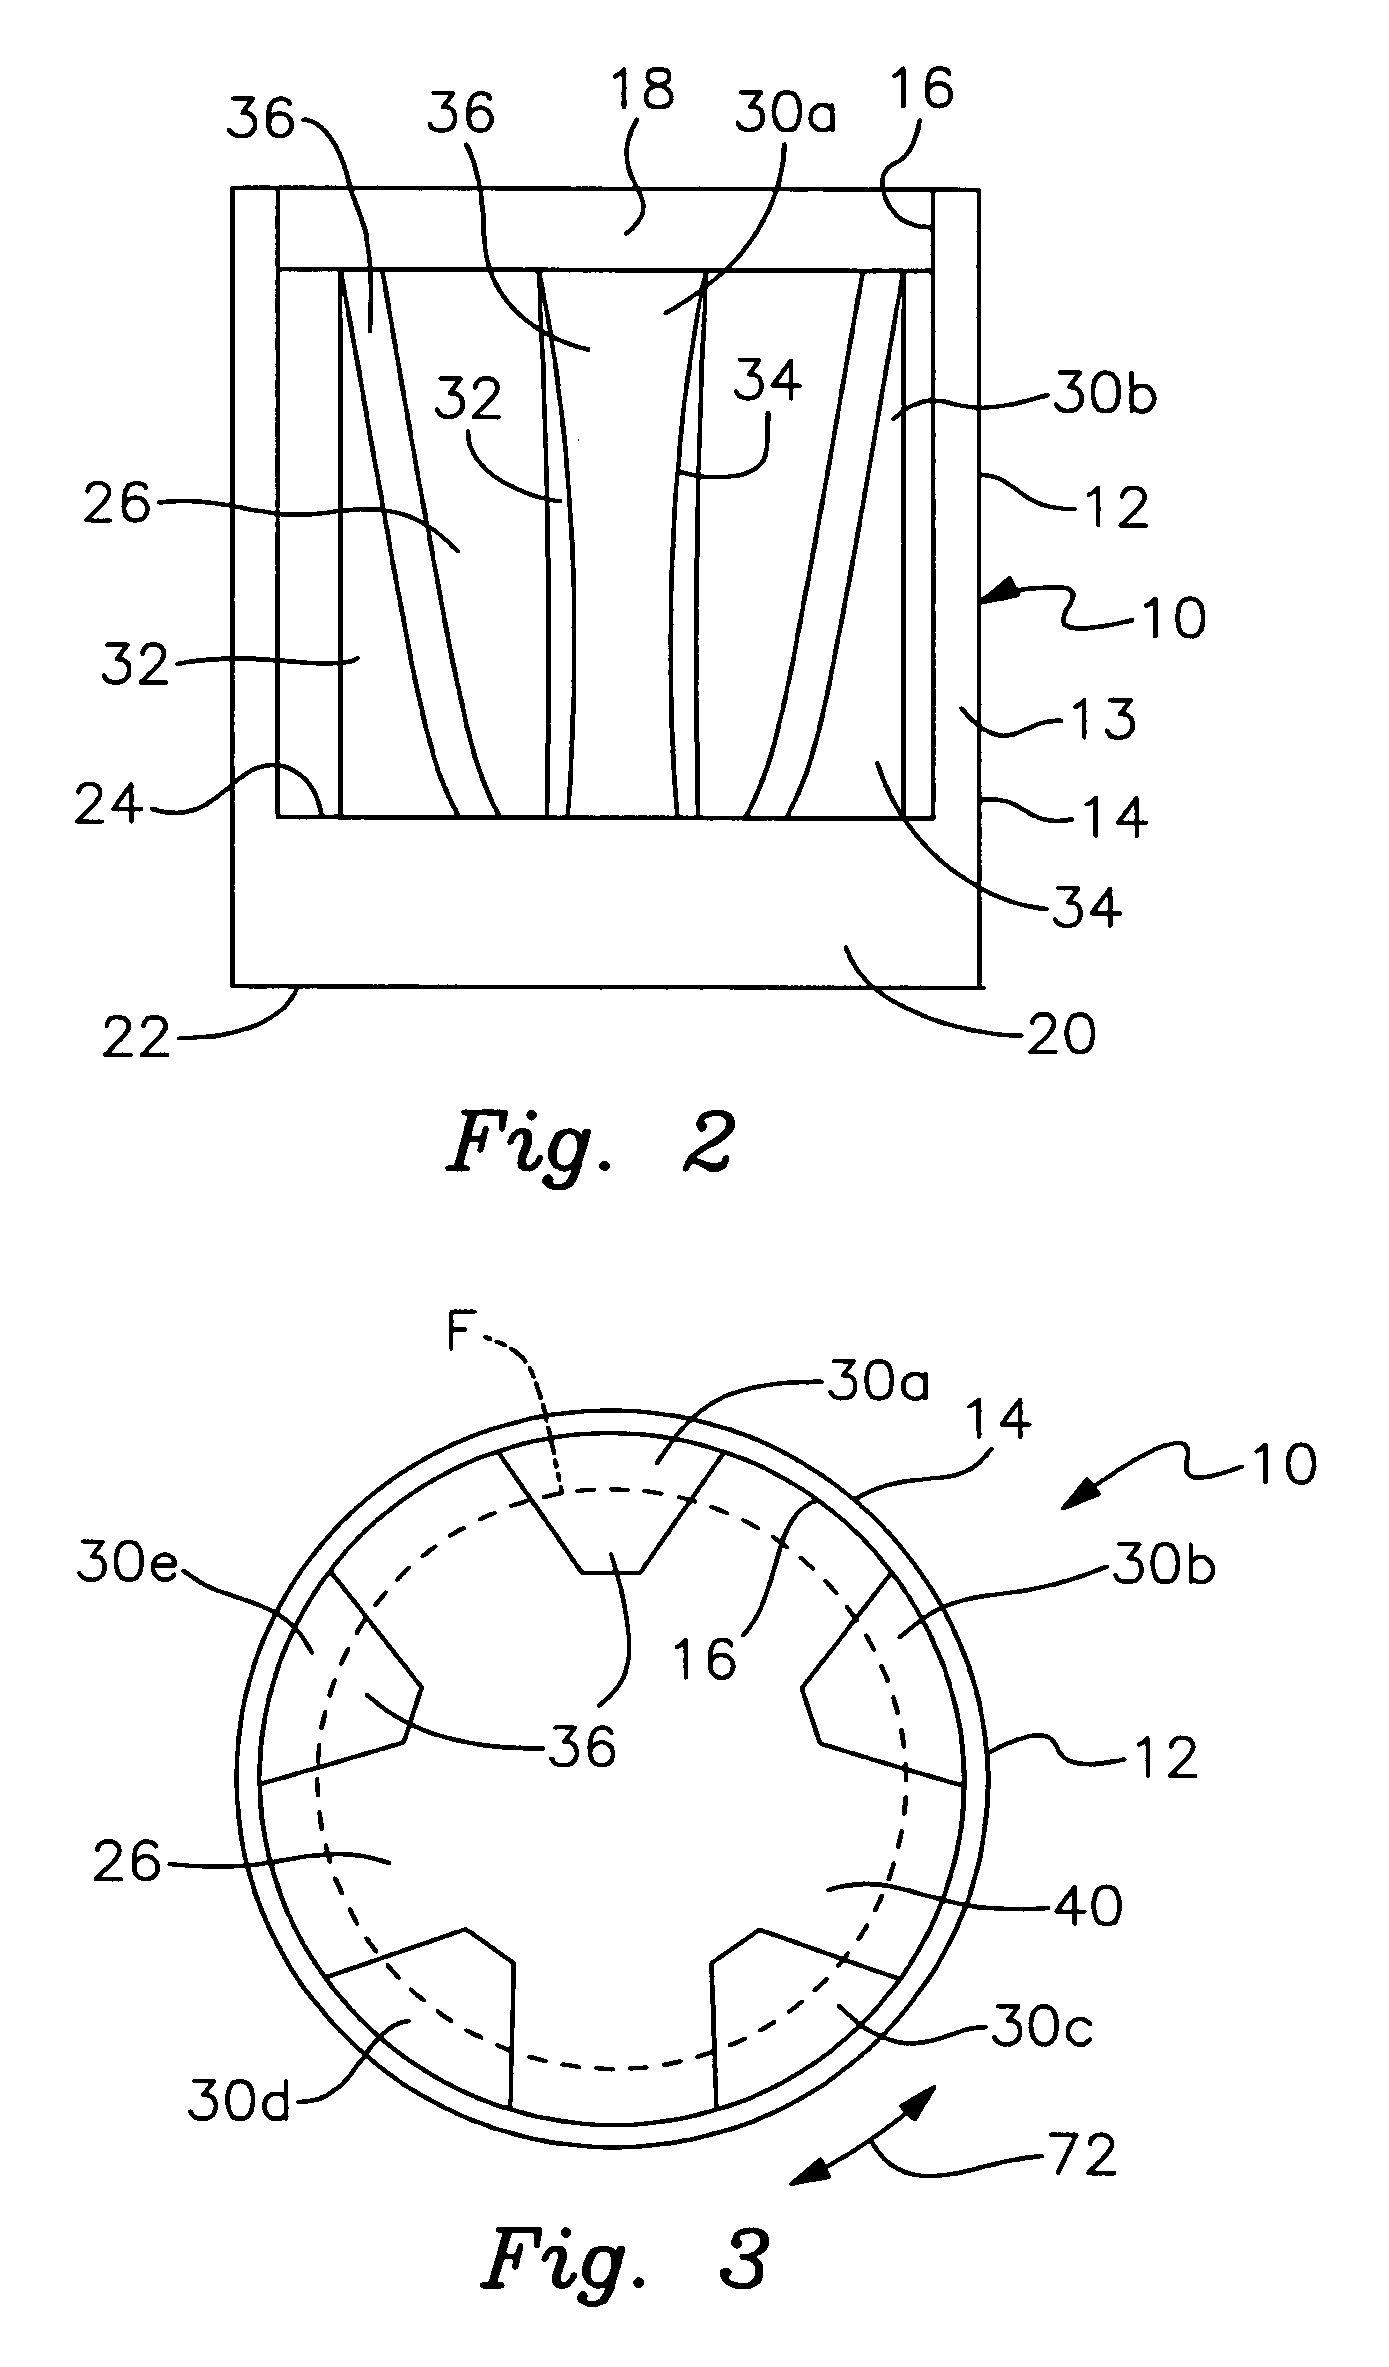 Tool with integral fluid reservoir for handling oil and fuel filters